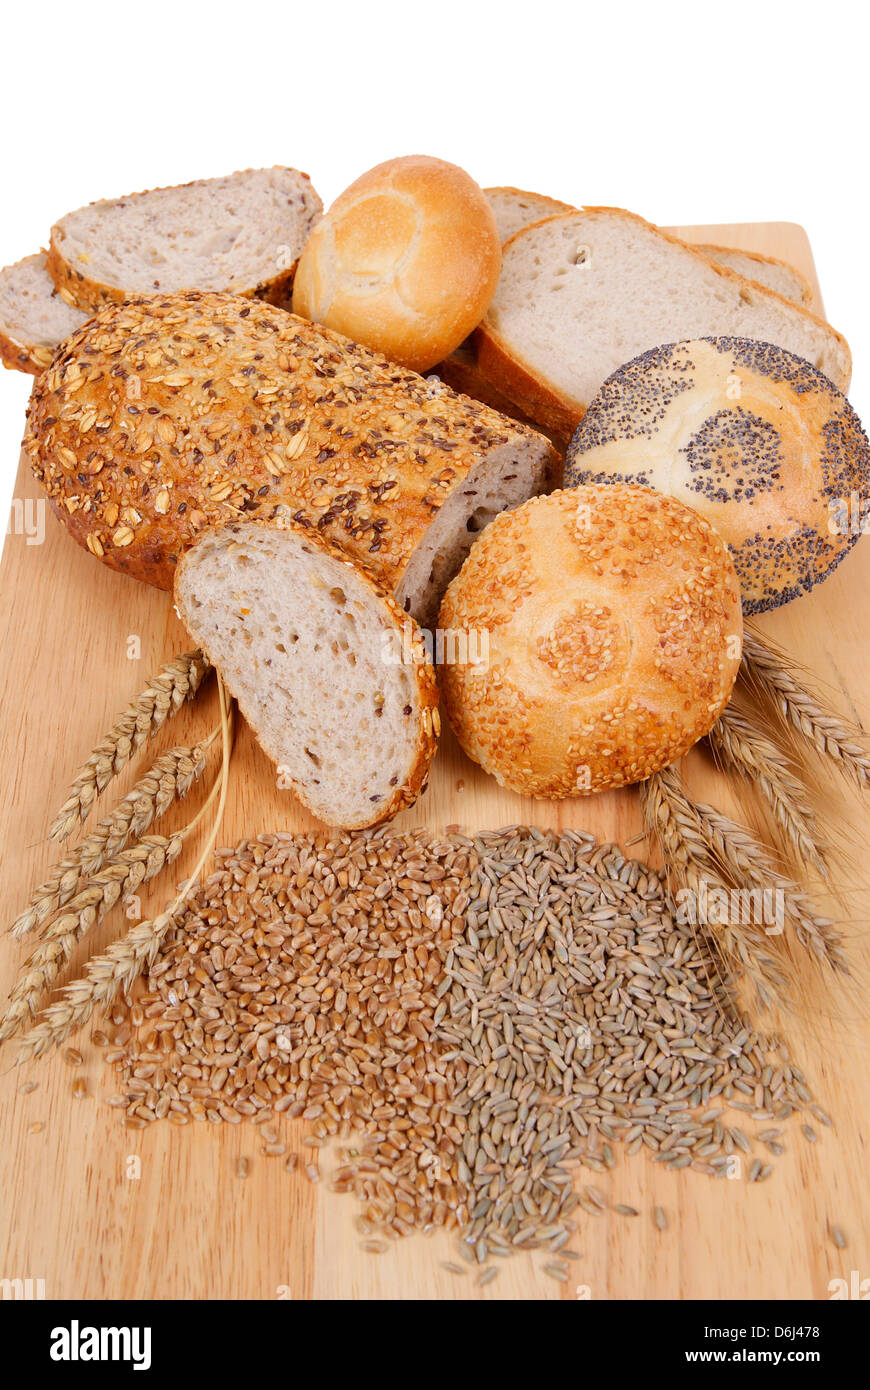 variable types of bread and rolls isolated on white background Stock Photo